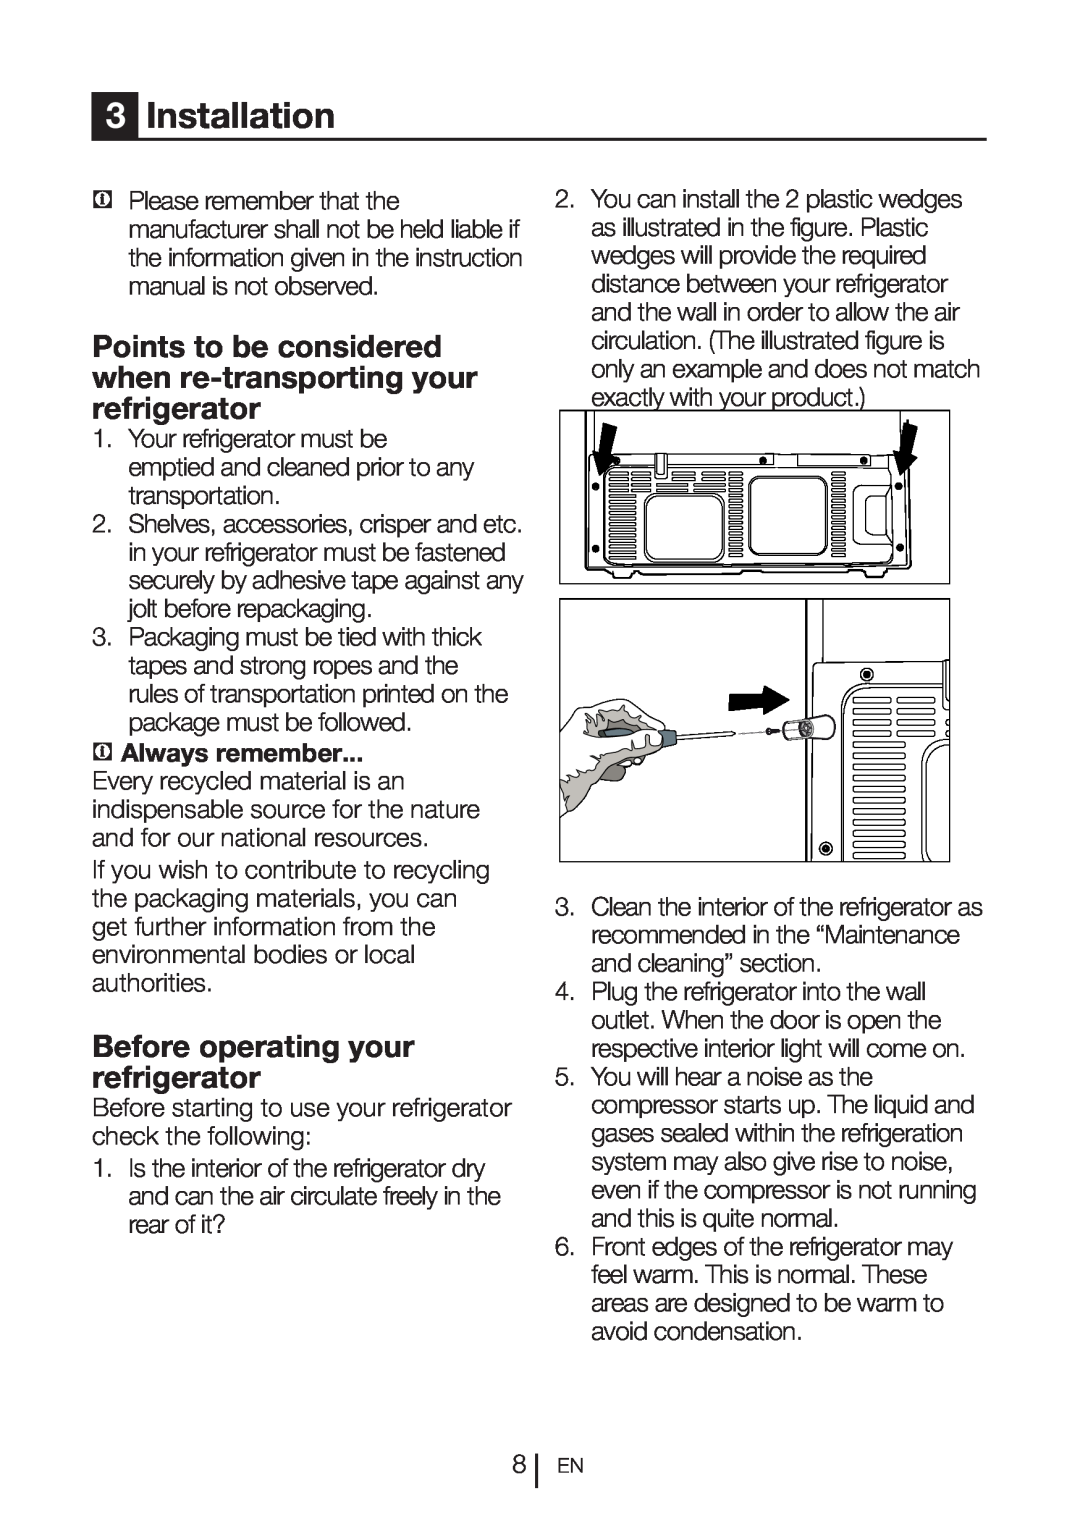 Blomberg KFD 9952 X, KFD 9950 X manual Installation, Points to be considered when re-transporting your refrigerator 